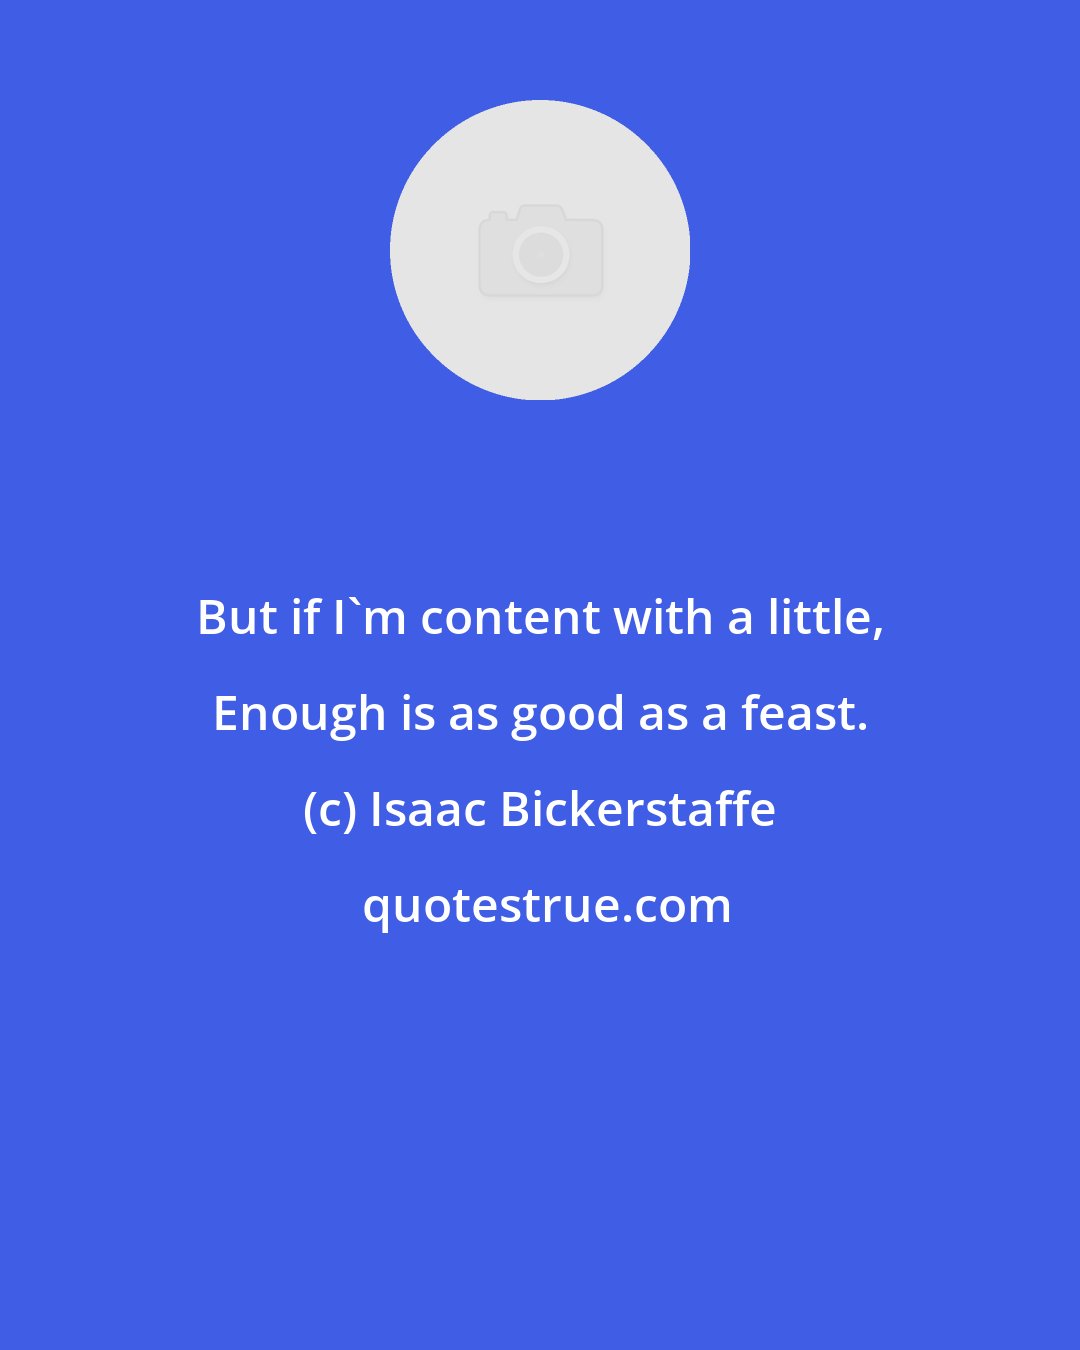 Isaac Bickerstaffe: But if I'm content with a little, Enough is as good as a feast.